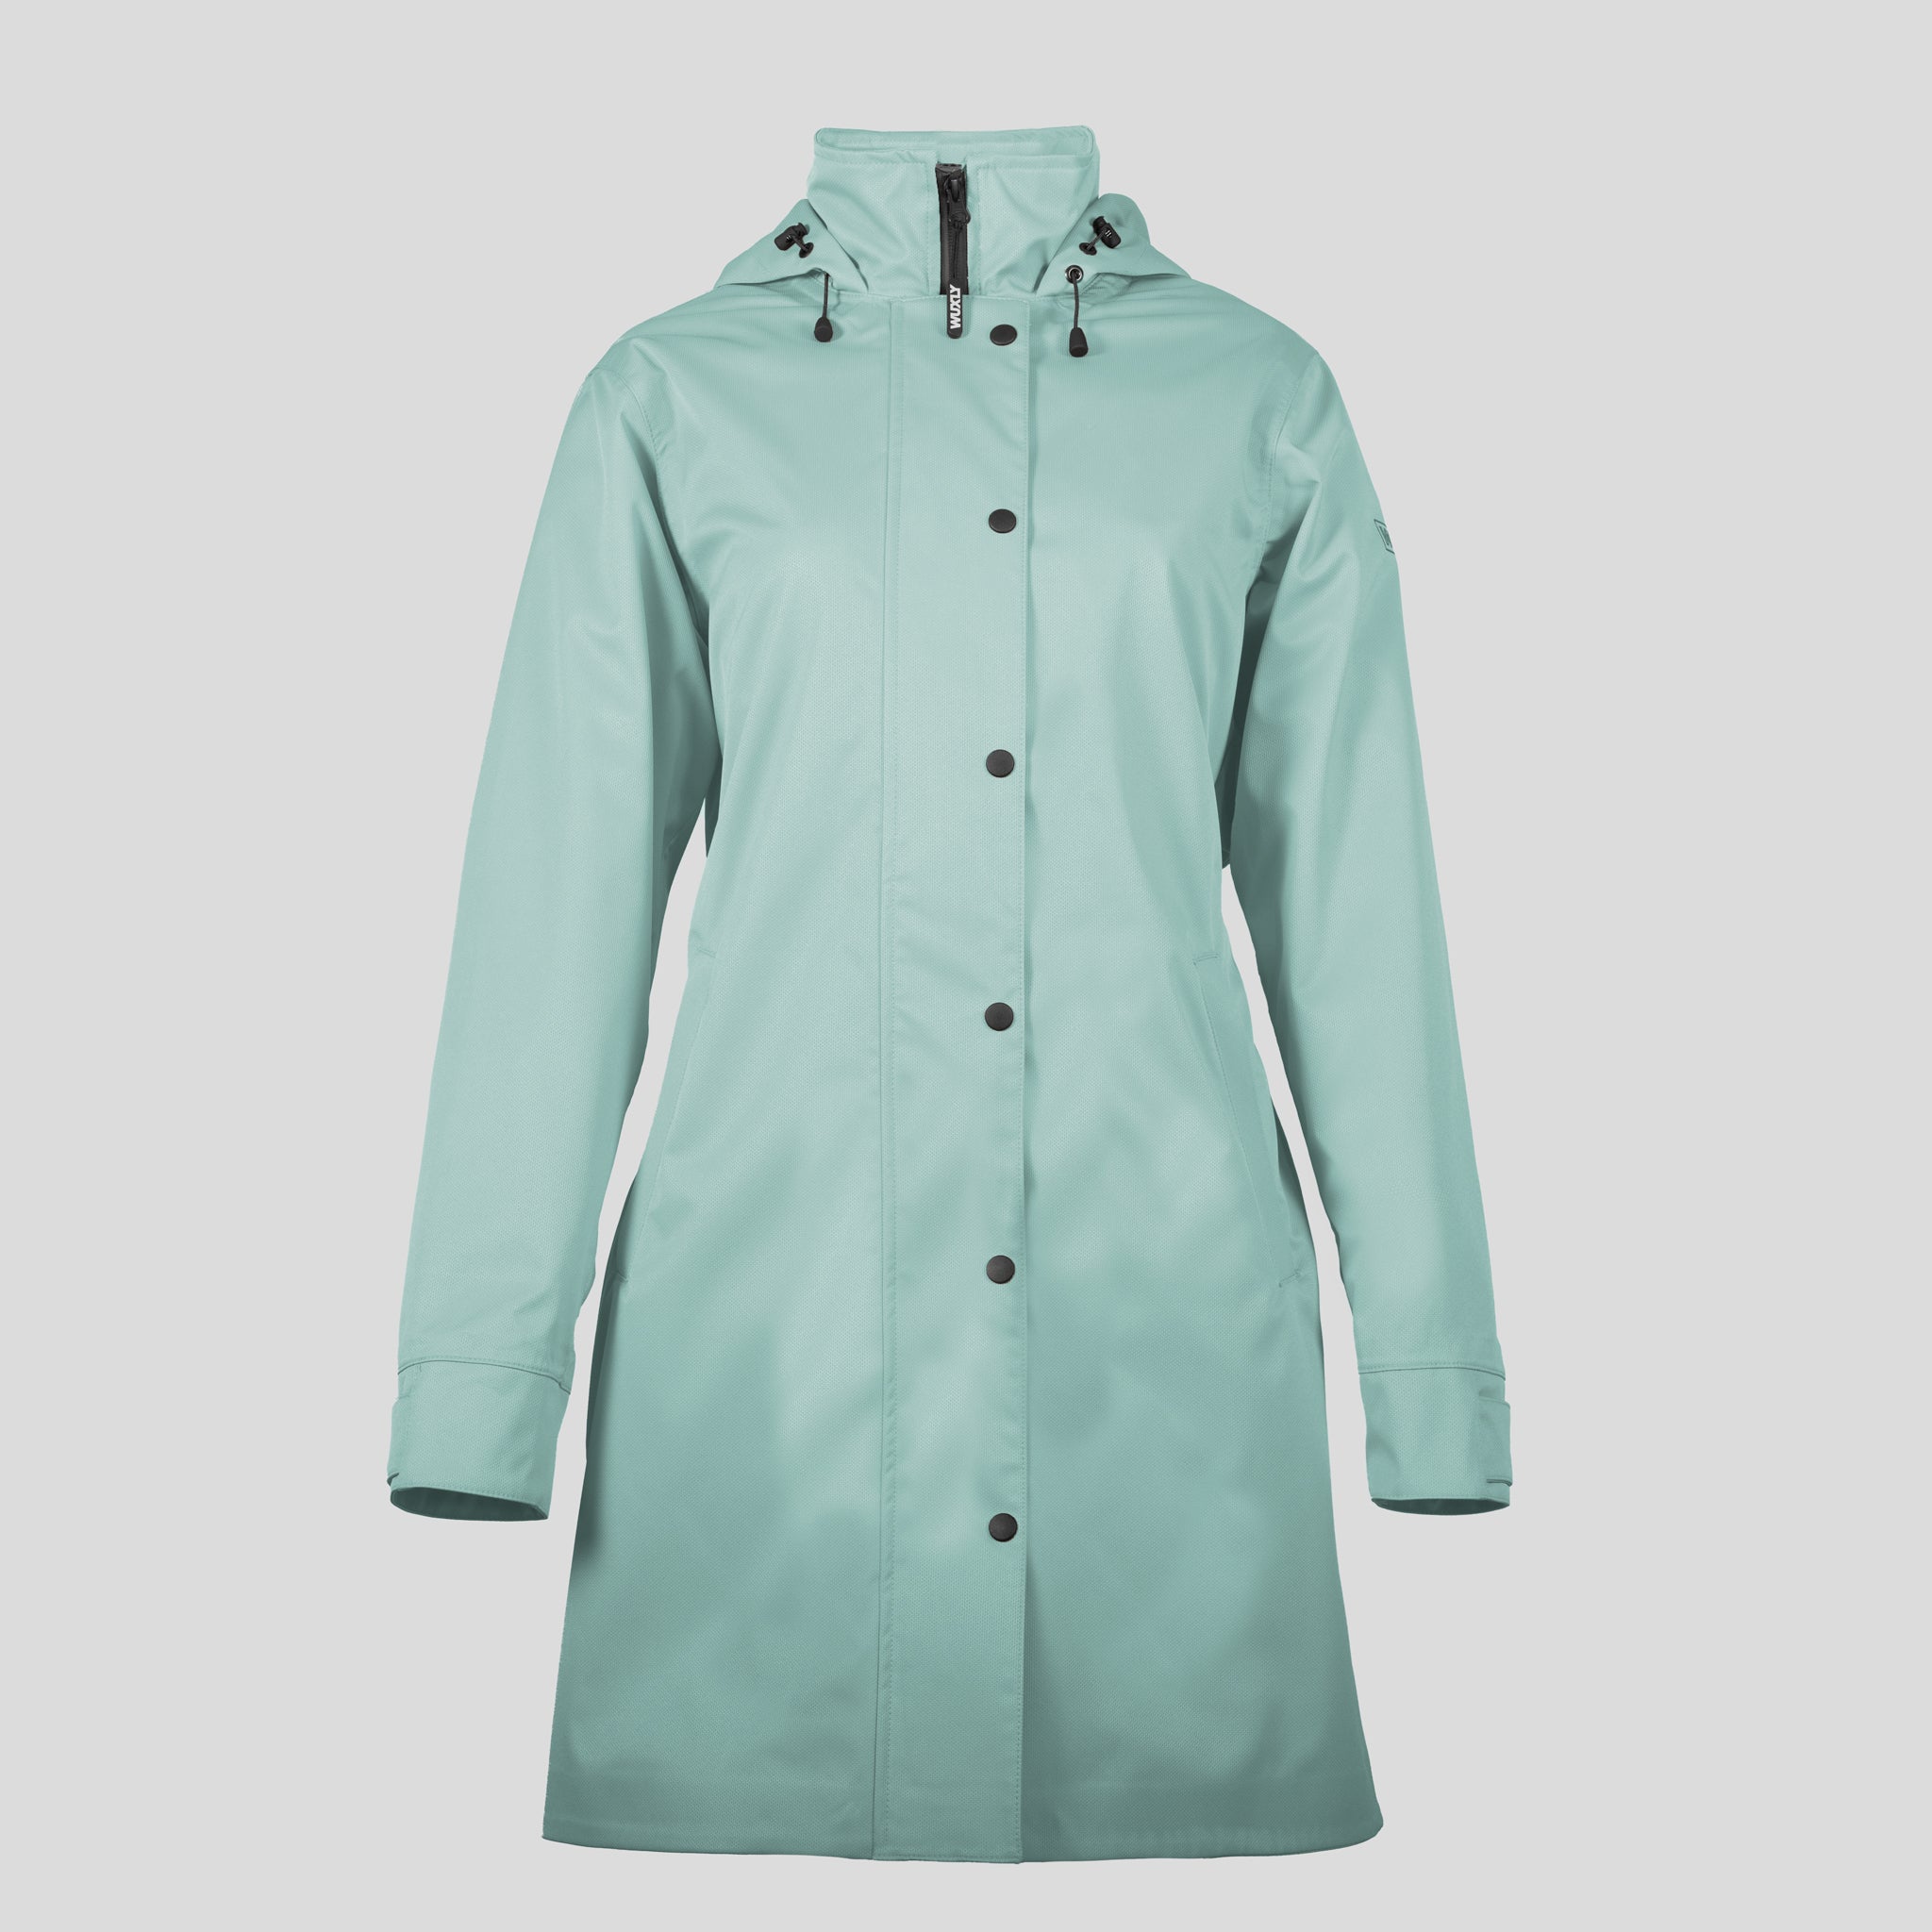 Riverside Trench Mint Teal